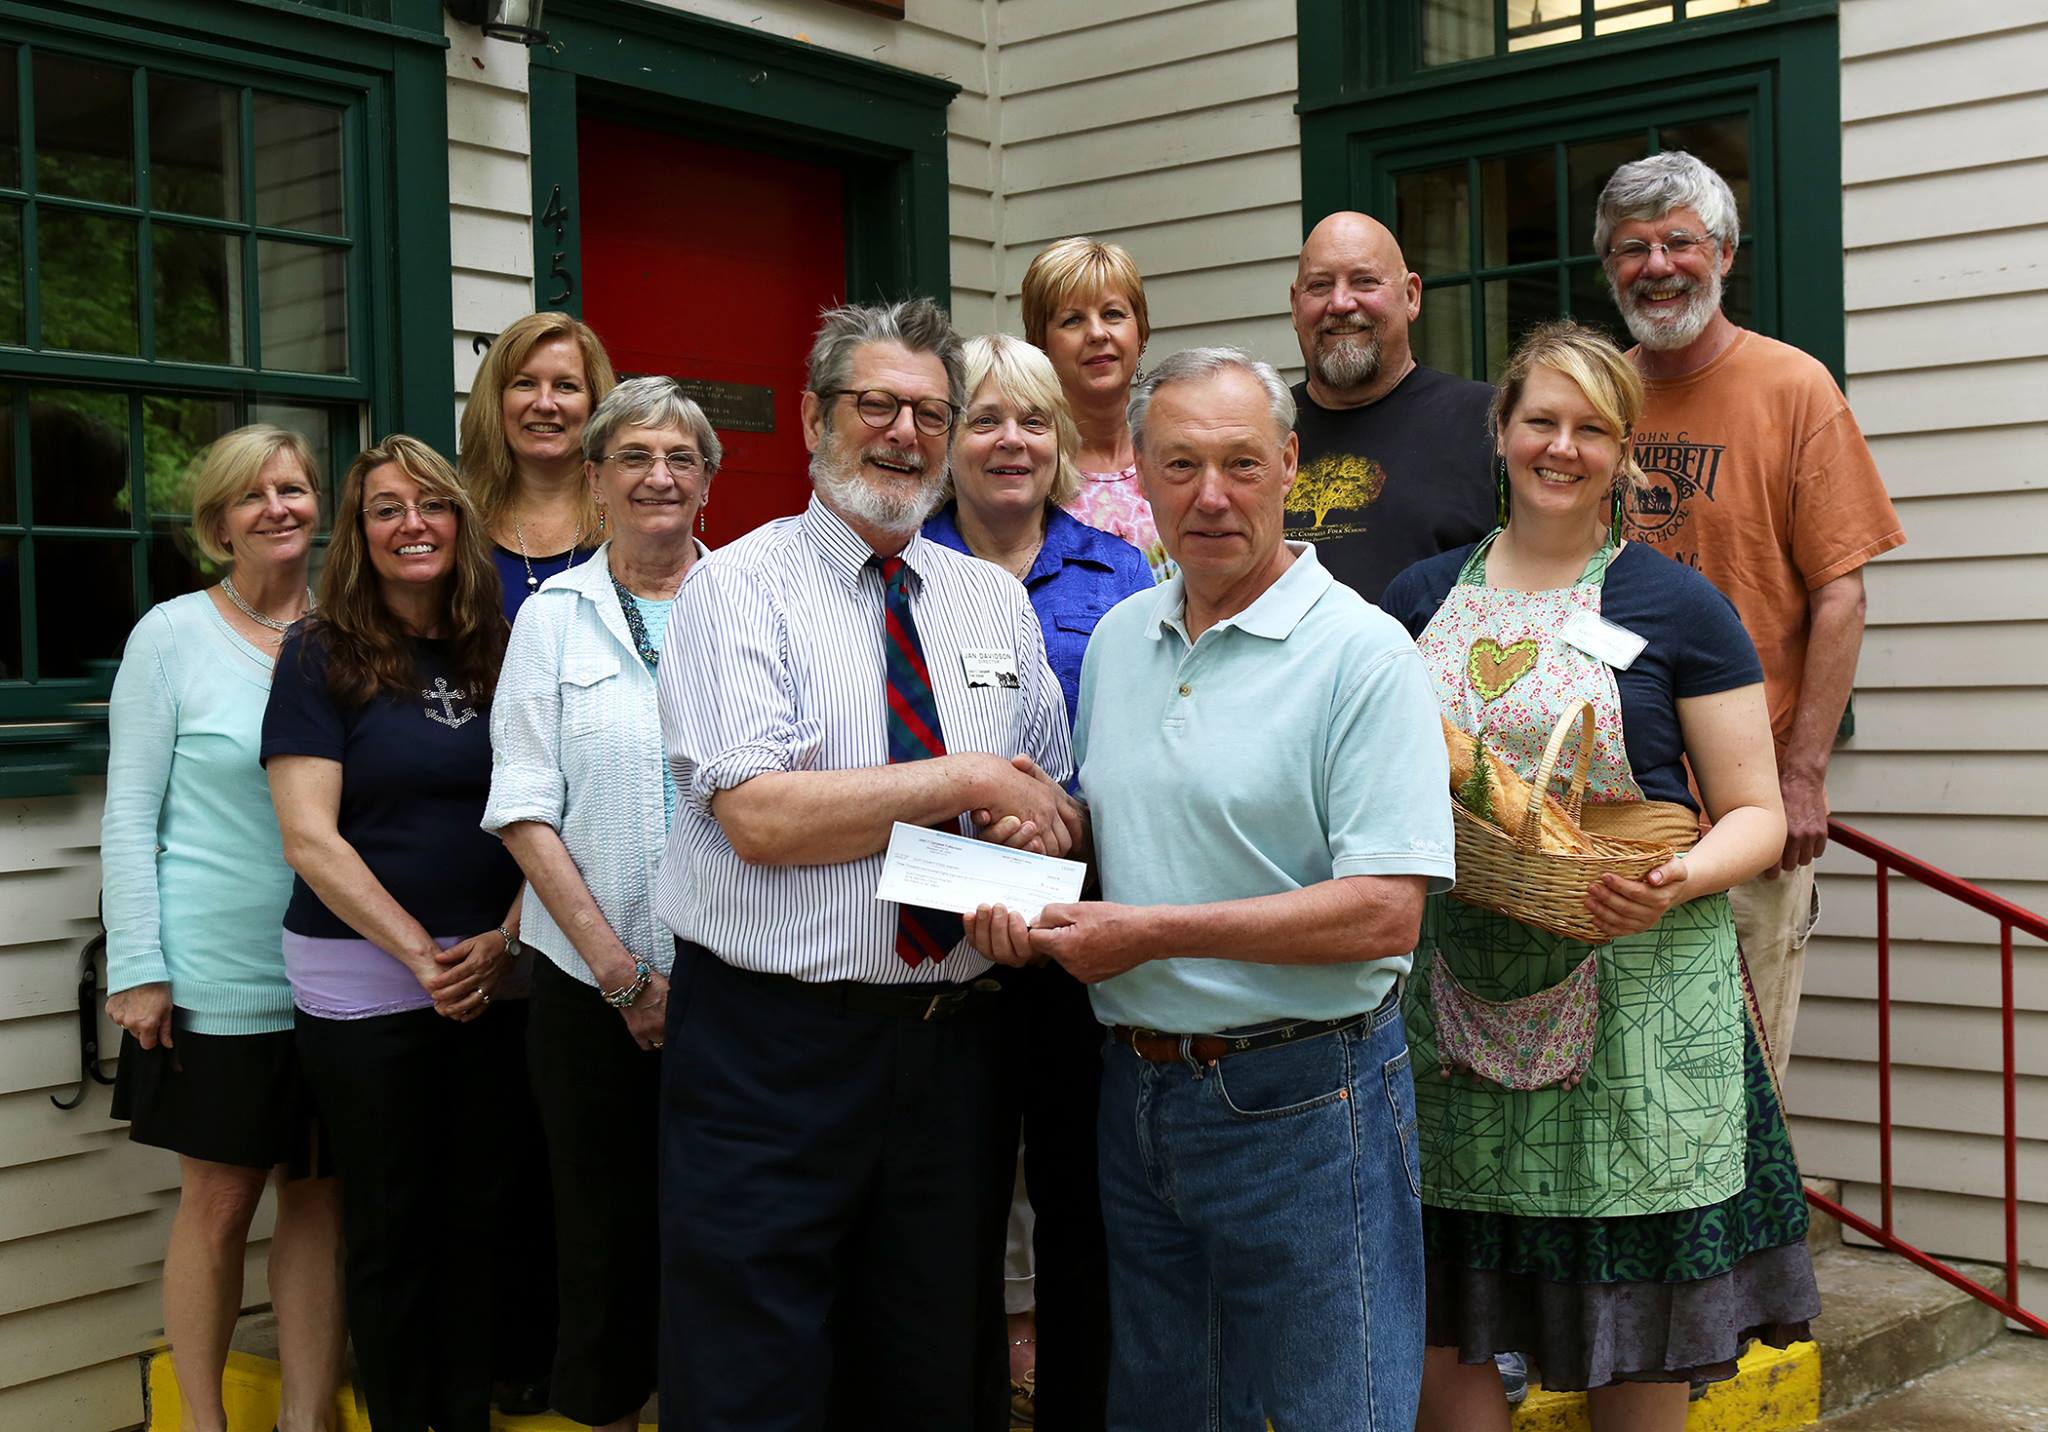 On May 10, 2016, the staff of John C. Campbell Folk School and Empty Bowls volunteers presented a check for $3,188 to Fred Sickel, President of Clay County Food Bank. The Food Bank provides food for over 1200 families each month, 30% who are children. Presenting the check, Folk School Director Jan Davidson and Fred Sickel. Also pictured from left to right: Kate Delong, Ellen Sandor, Jennifer Slucher, Dianne Arnold, Marianne Hatchett, Colleen Plonsky, Mike Lalone, Cory Marie Podielski, and Harry Hearne. The Empty Bowls fundraiser for Cherokee and Clay County food banks has been hosted by the John C. Campbell Folk School for the past 10 years.